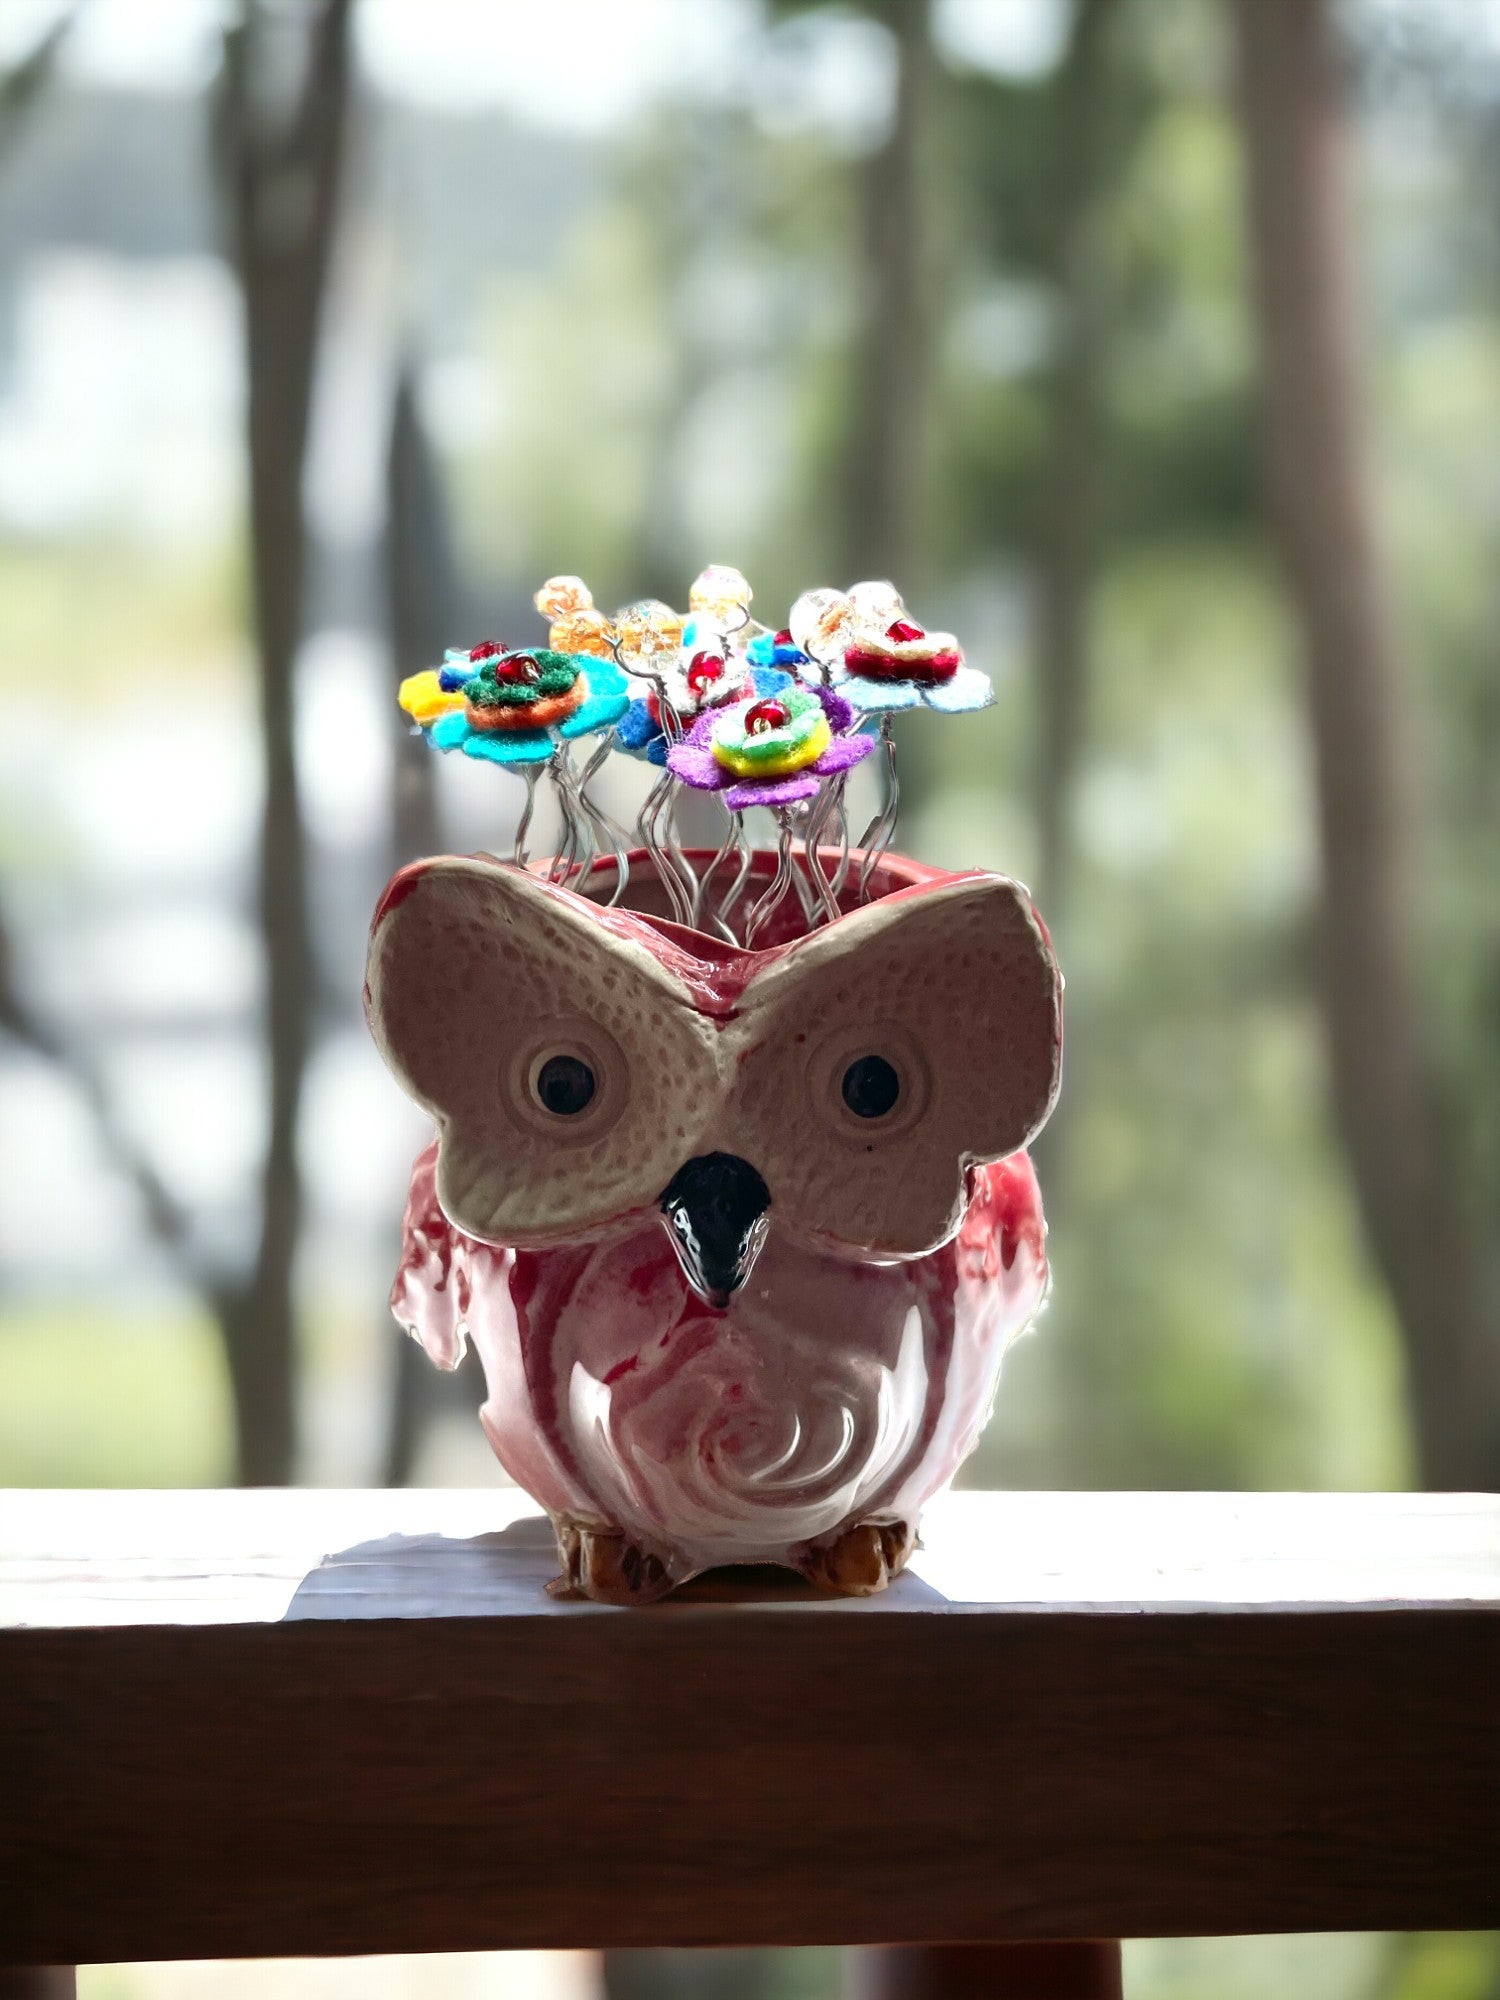 Red Owl with Multi-Colored Felt Flowers